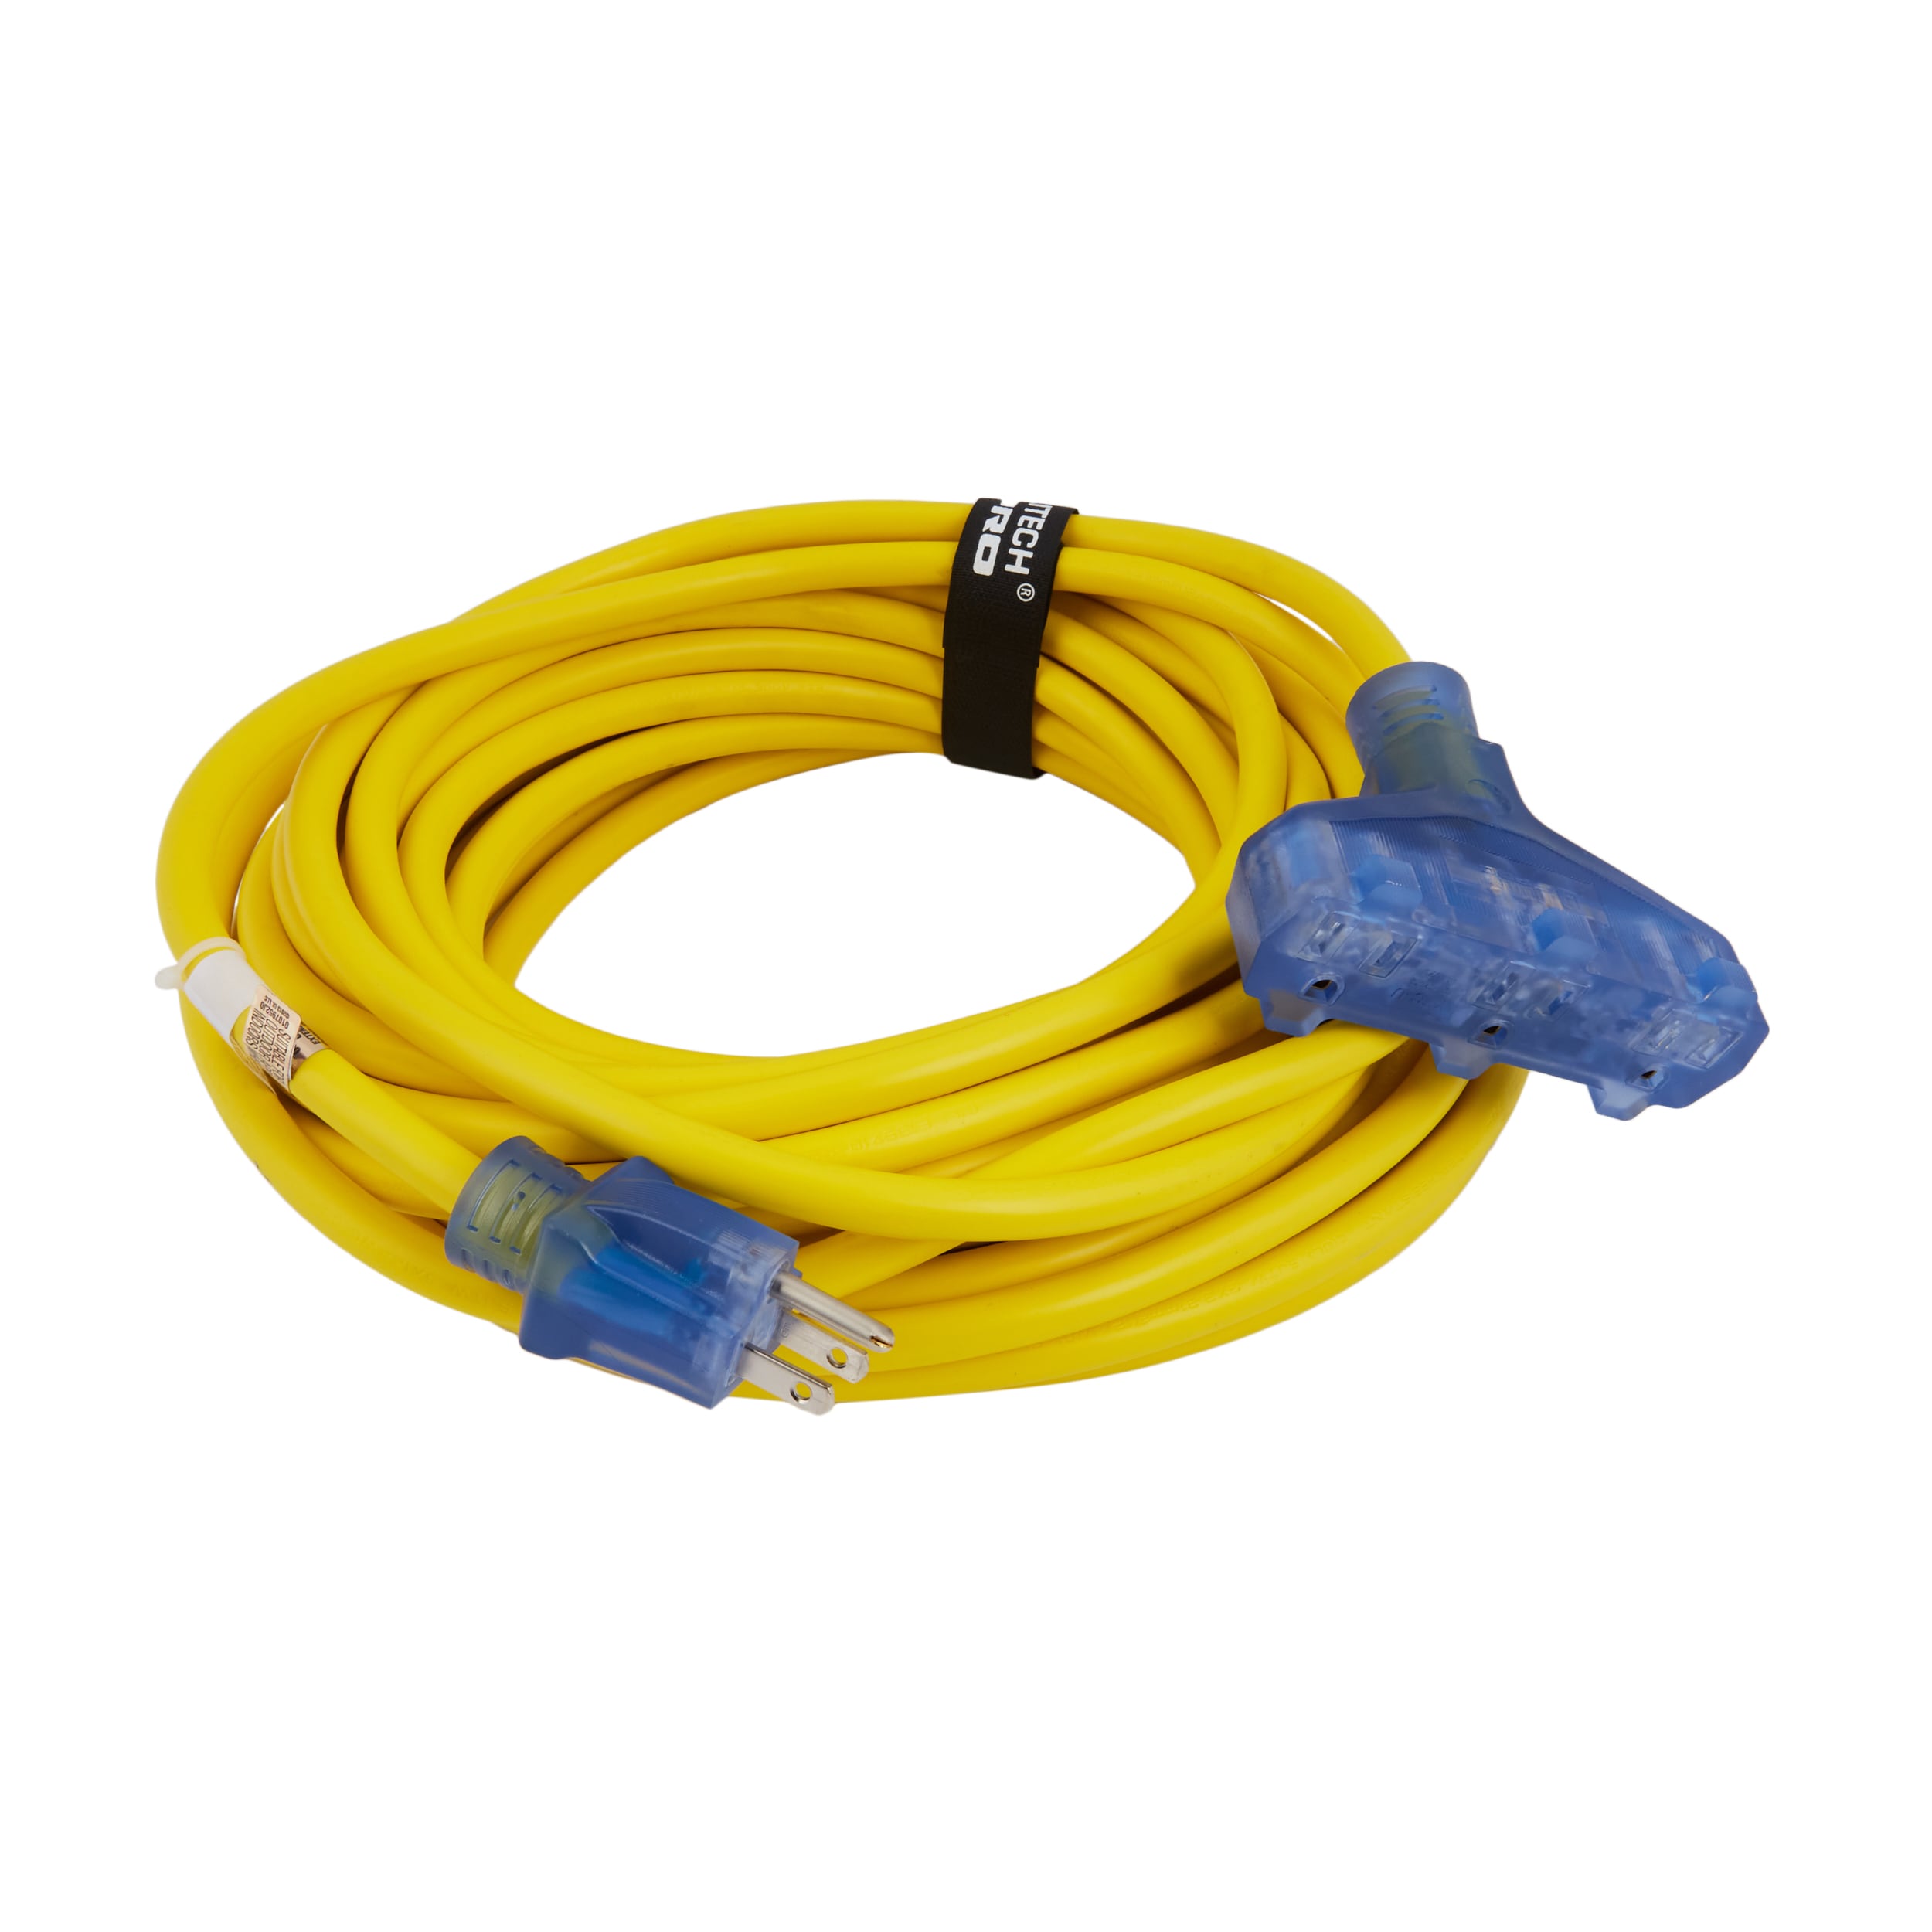 100 ft. x 10/3 Gauge Triple Tap Extension Cord, Yellow